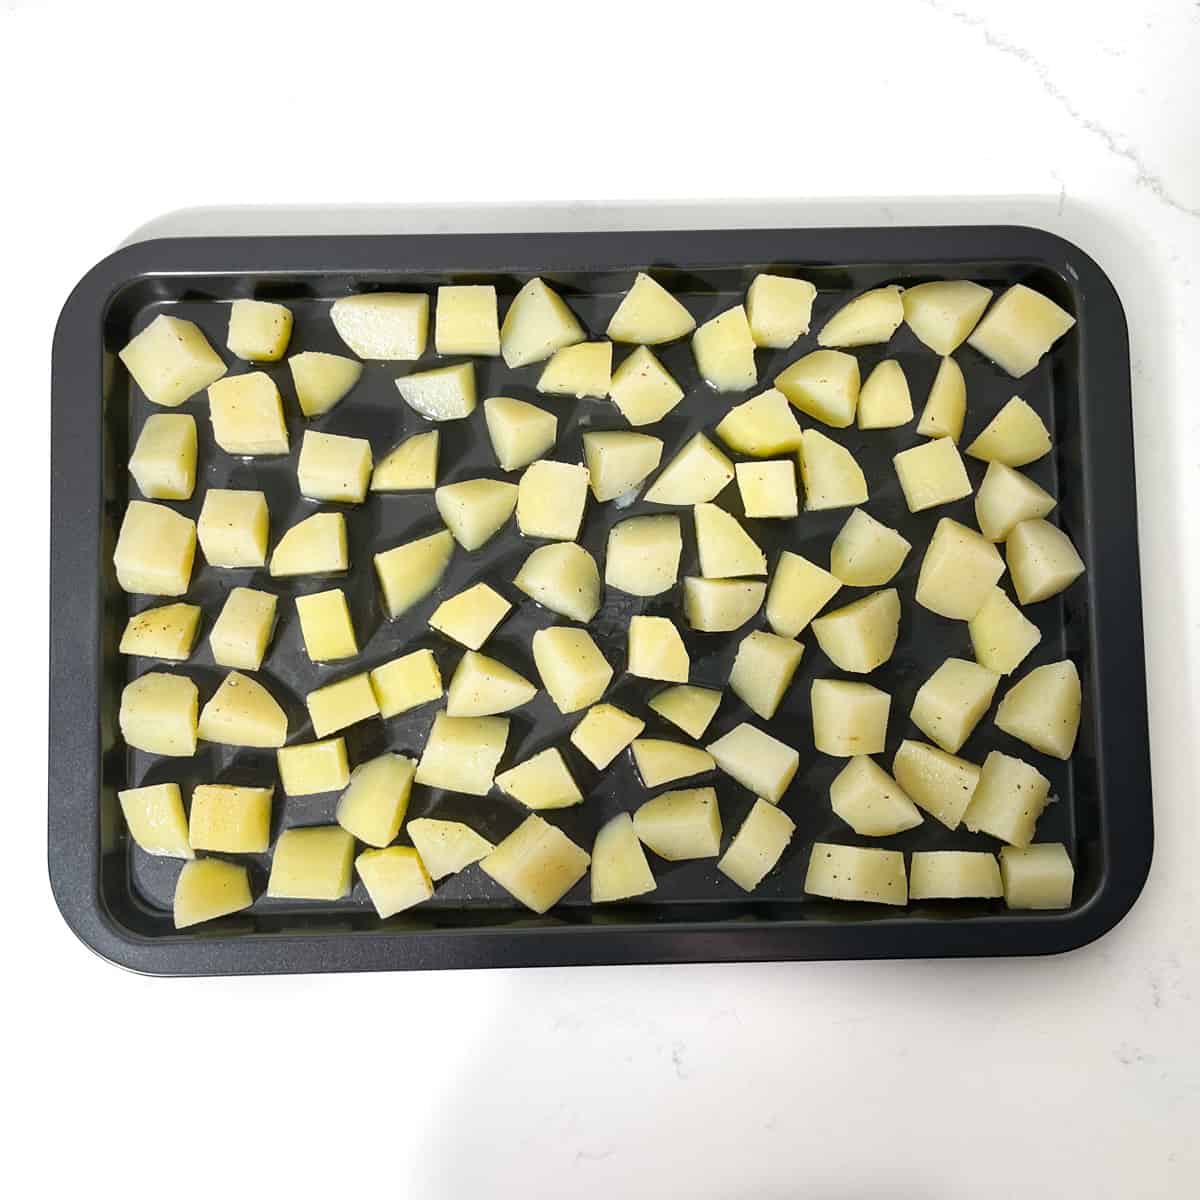 Parmentier potato cubes spread out on a baking tray in a single layer.